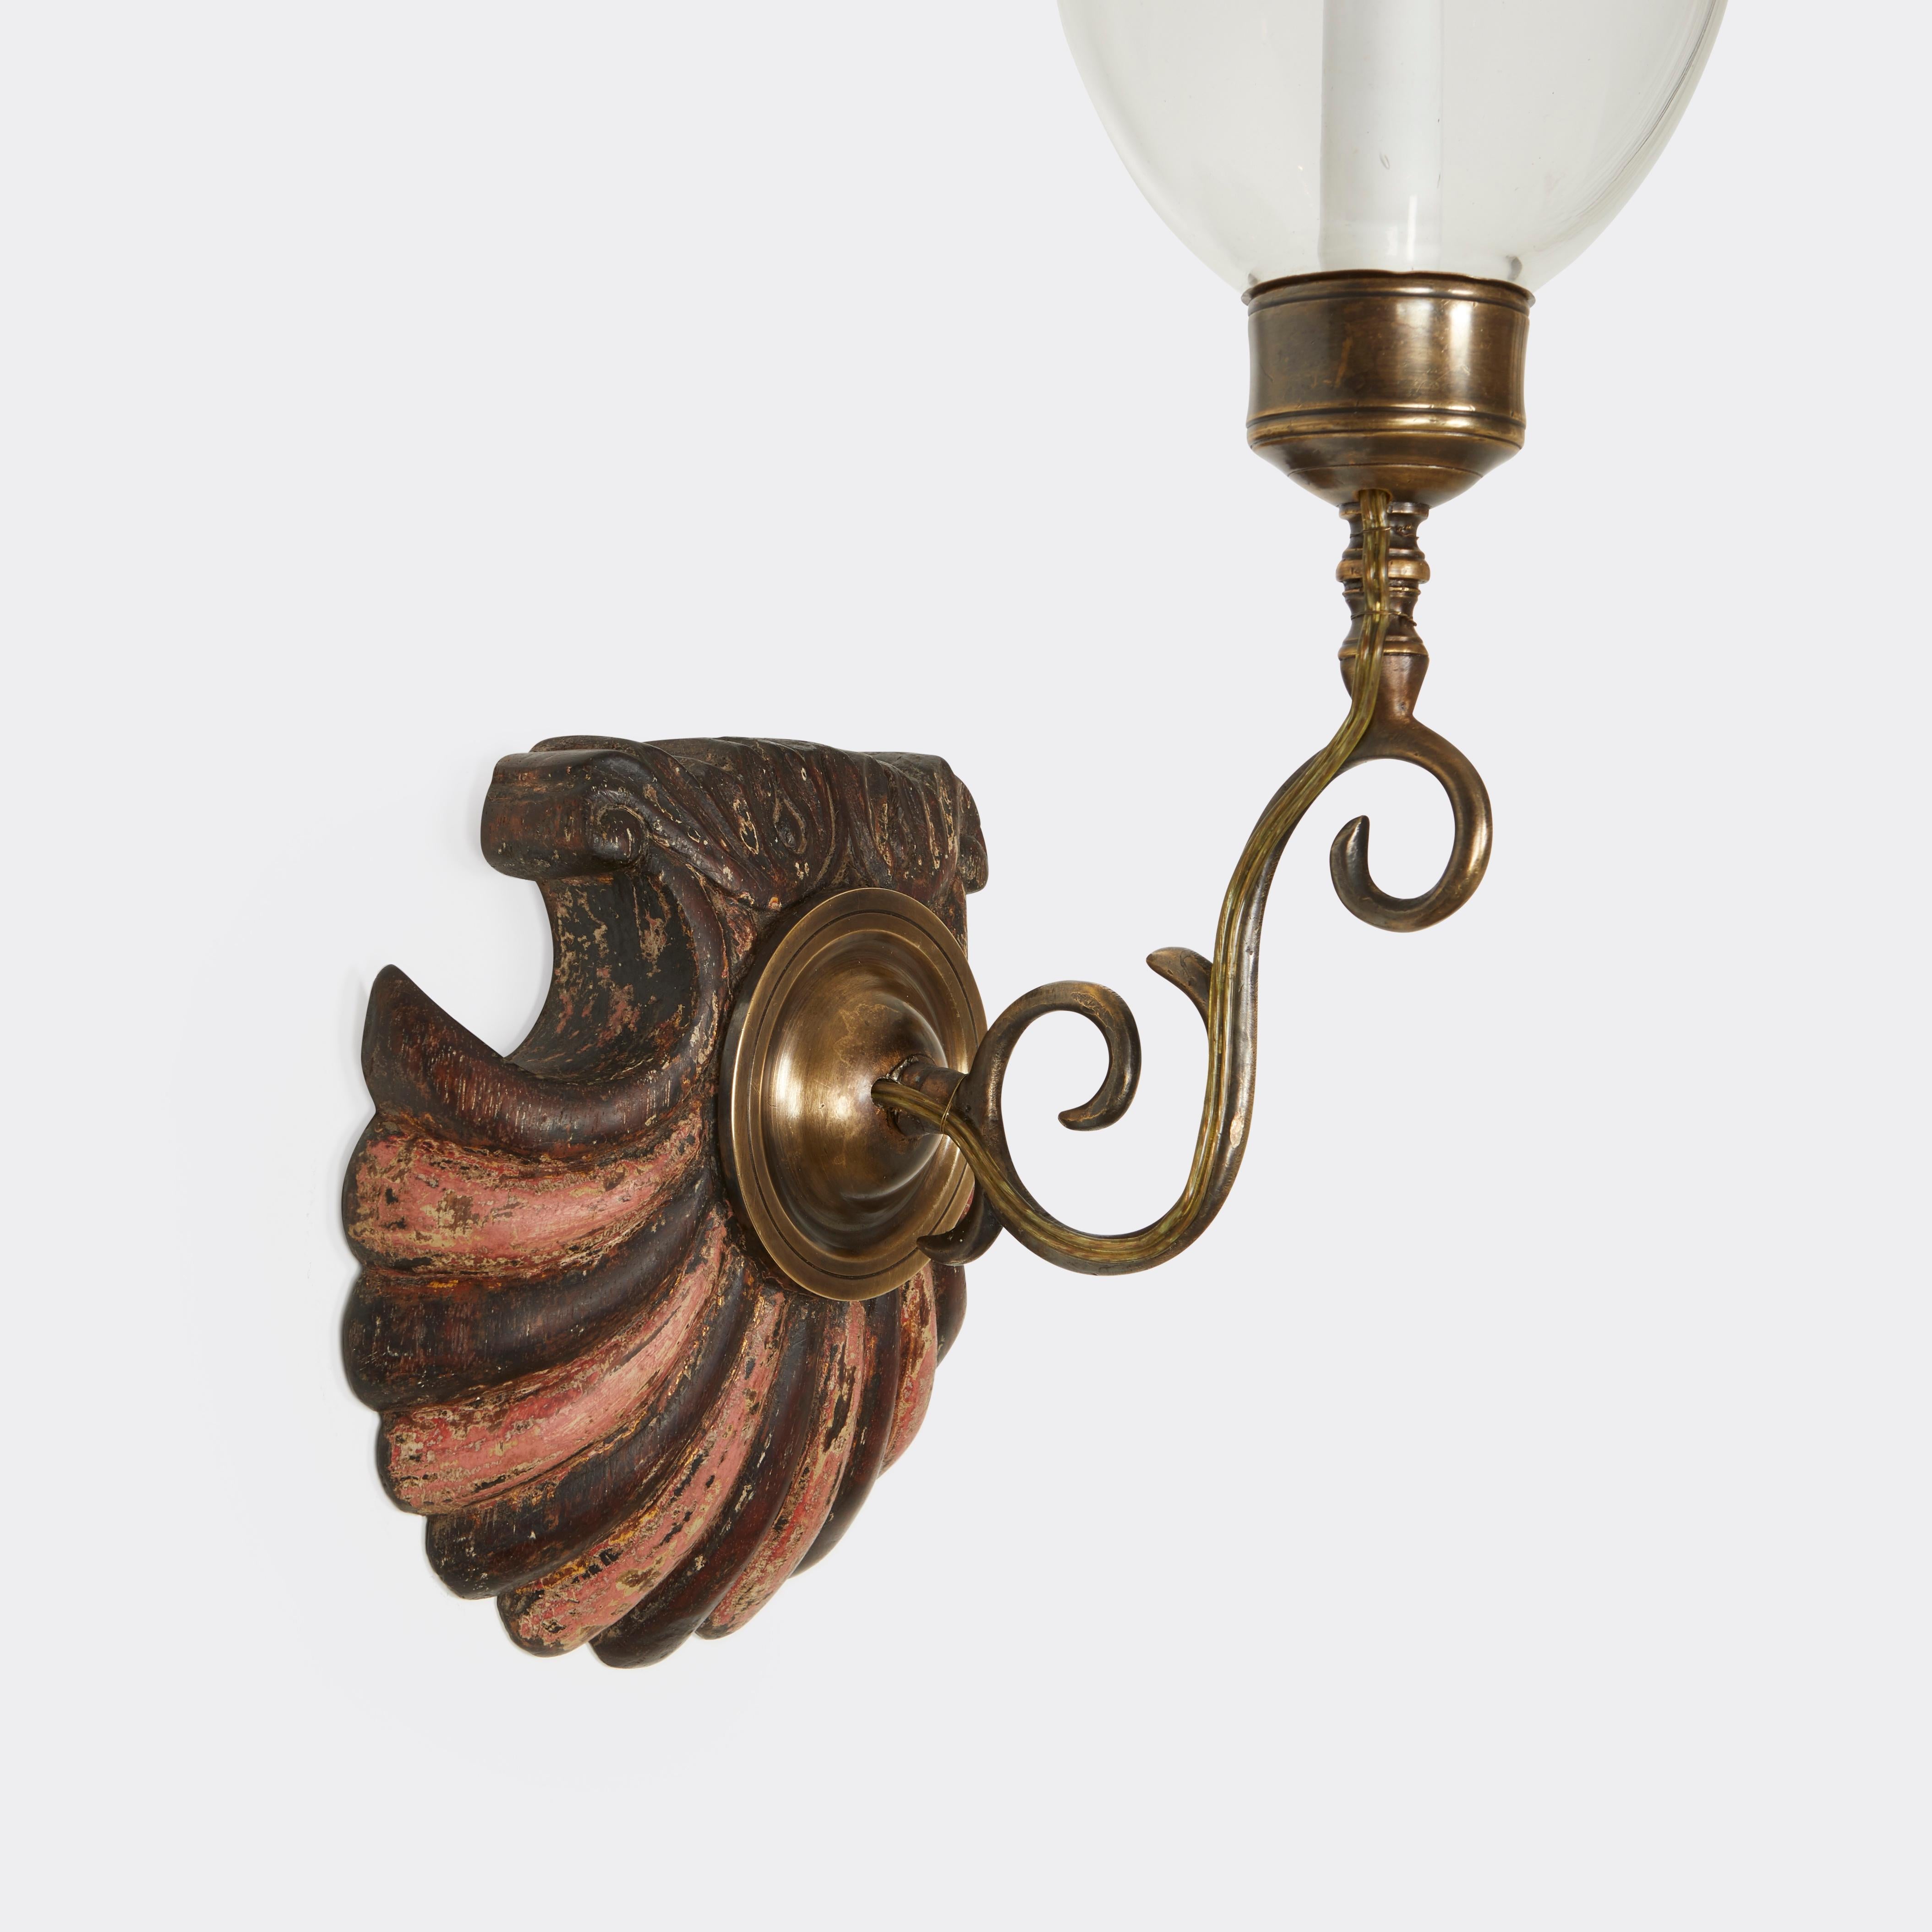 A pair of antique hand-carved scalloped shells from mahogany Anglo Indian styled backplates with painted decoration with pink stripes alternating with mahogany, patinated brass sconce fittings, and hand-blown clear glass. Electrified with one